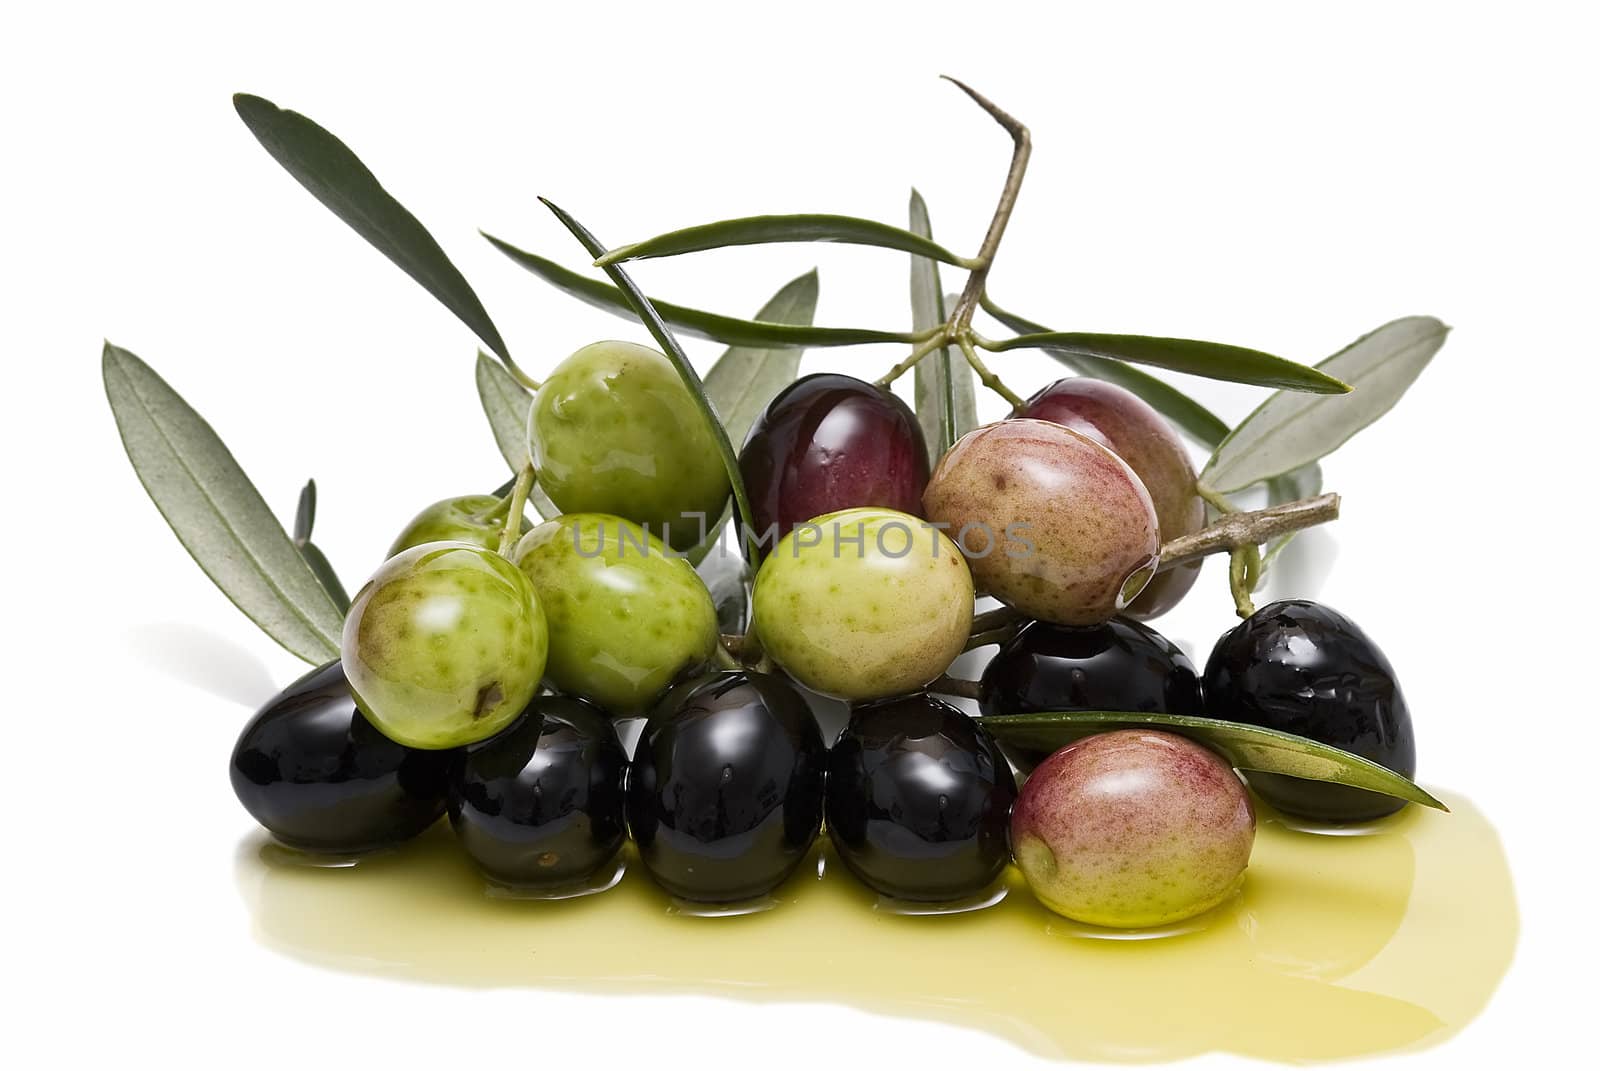 Some olives with branches and leaves and some olive oil.